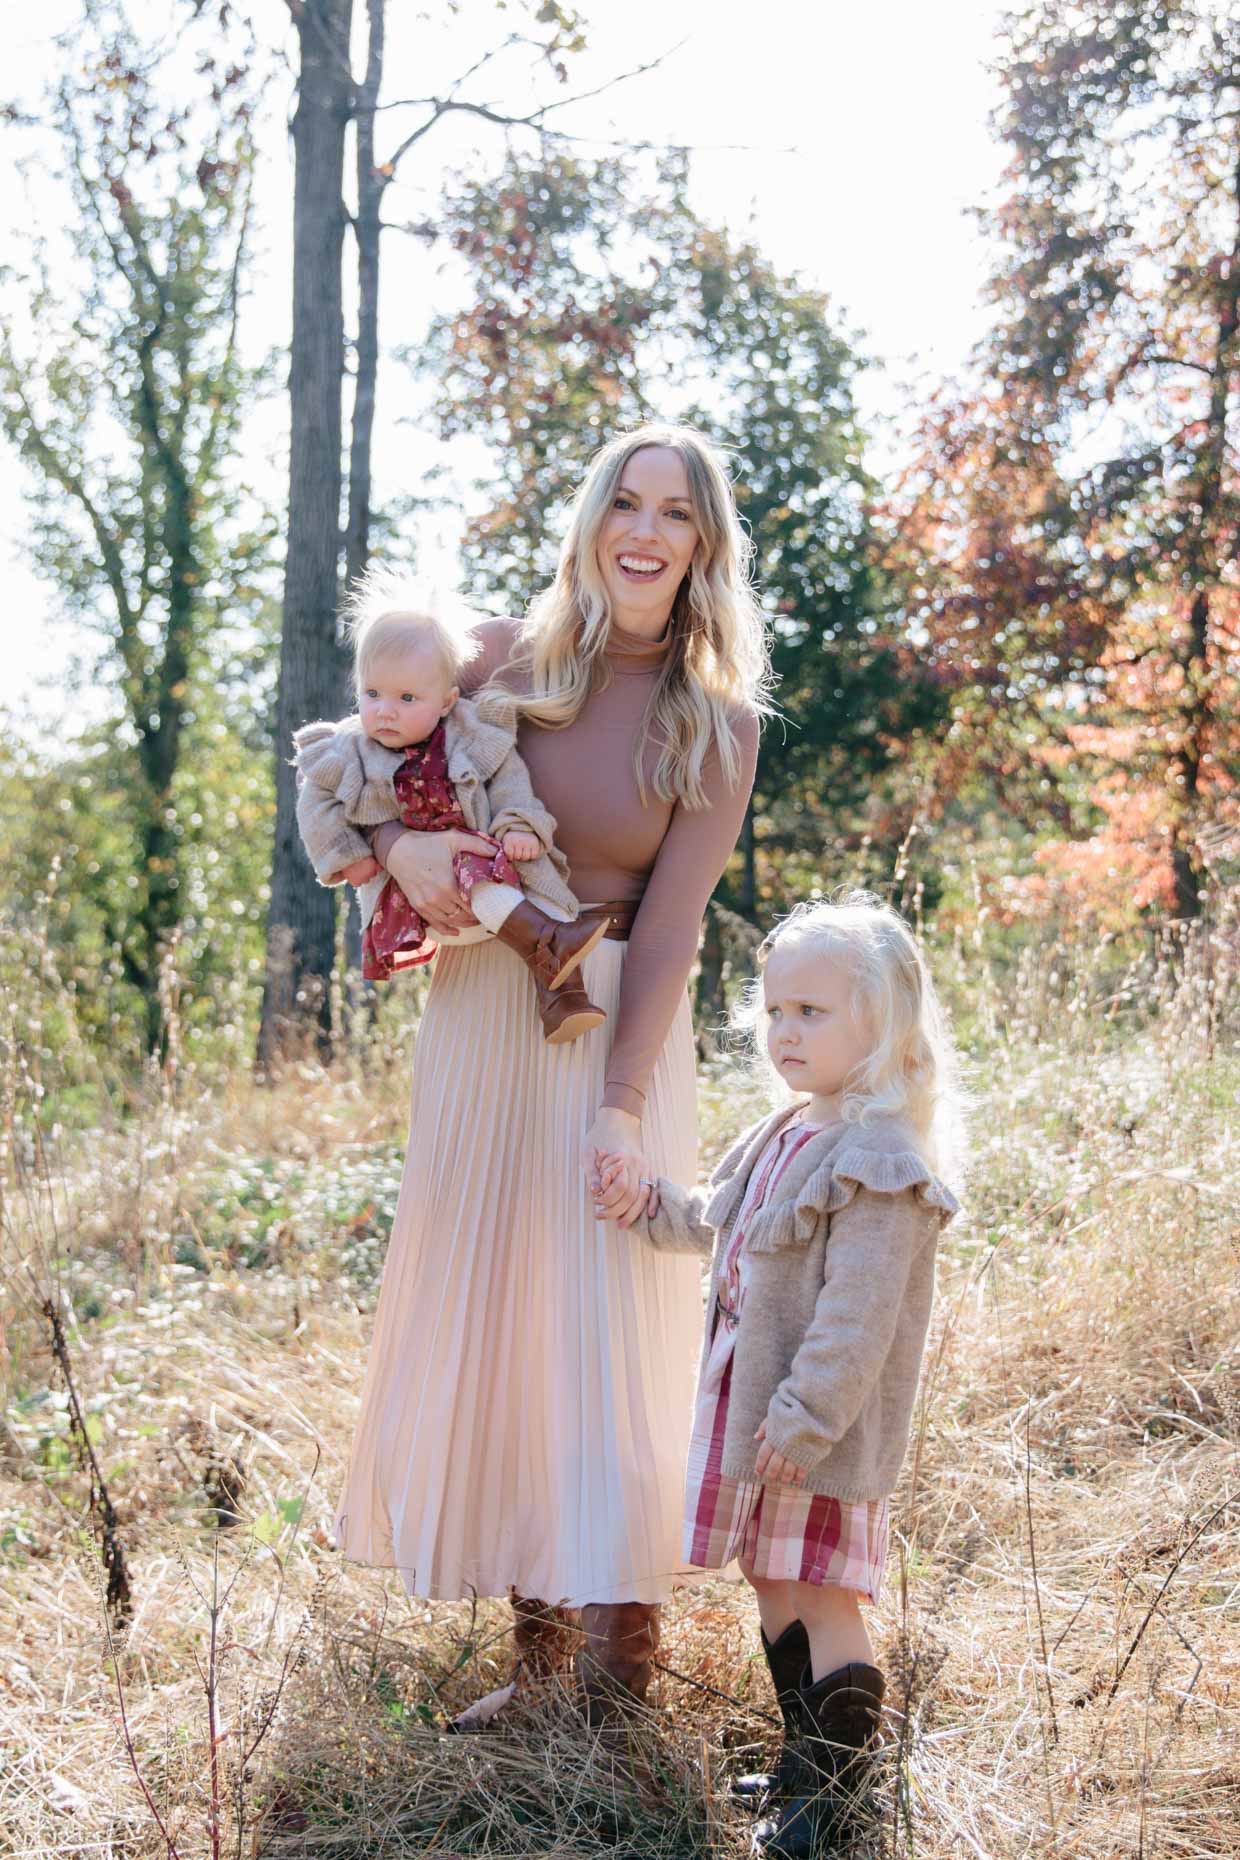 Meagan Brandon of Meagan's Moda shares Mommy and me fall style with floral dresses and cowboy boots